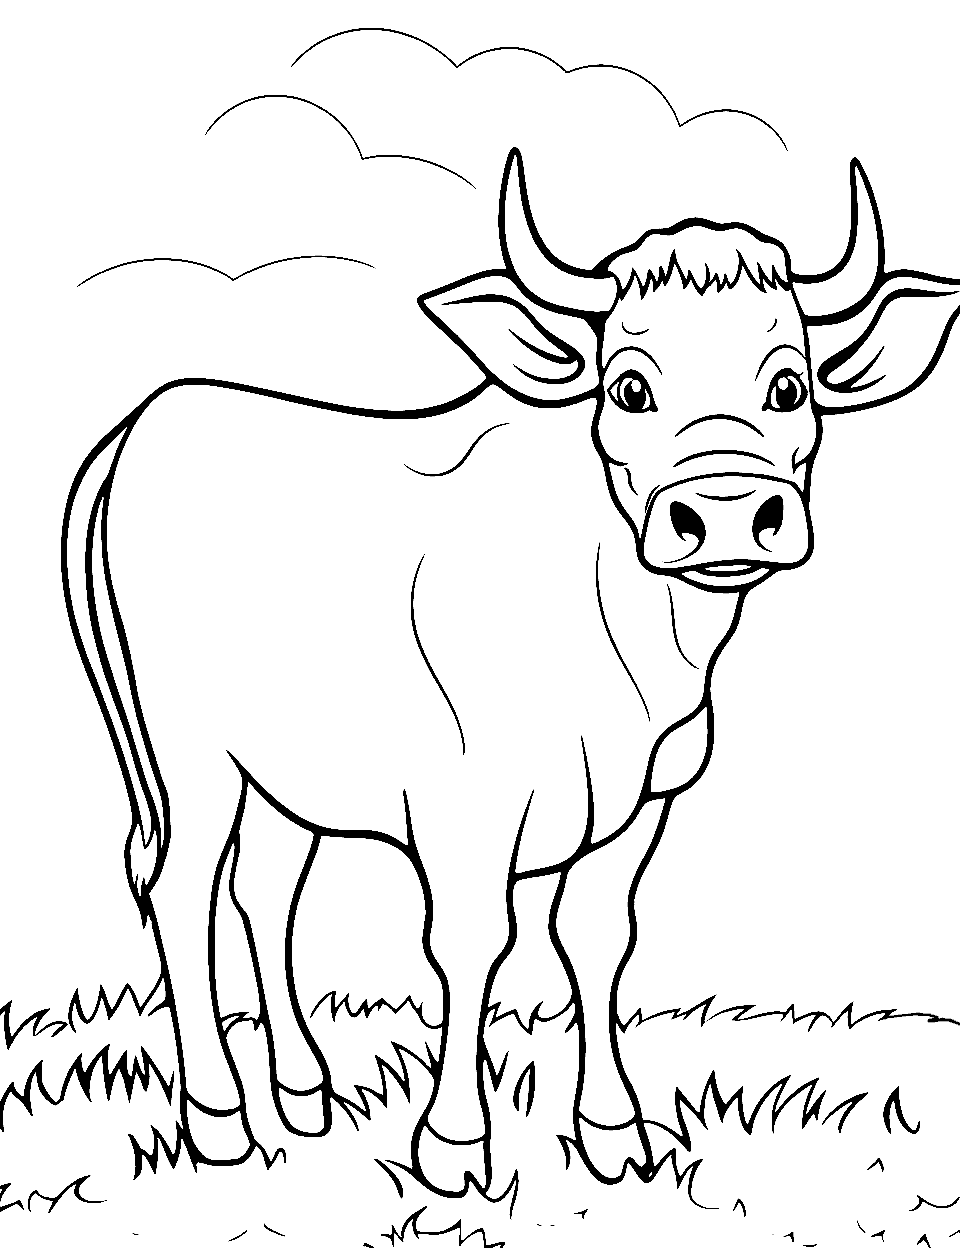 Elderly Cow in the Field Coloring Page - An older, wise-looking cow leisurely strolling through a gentle field.